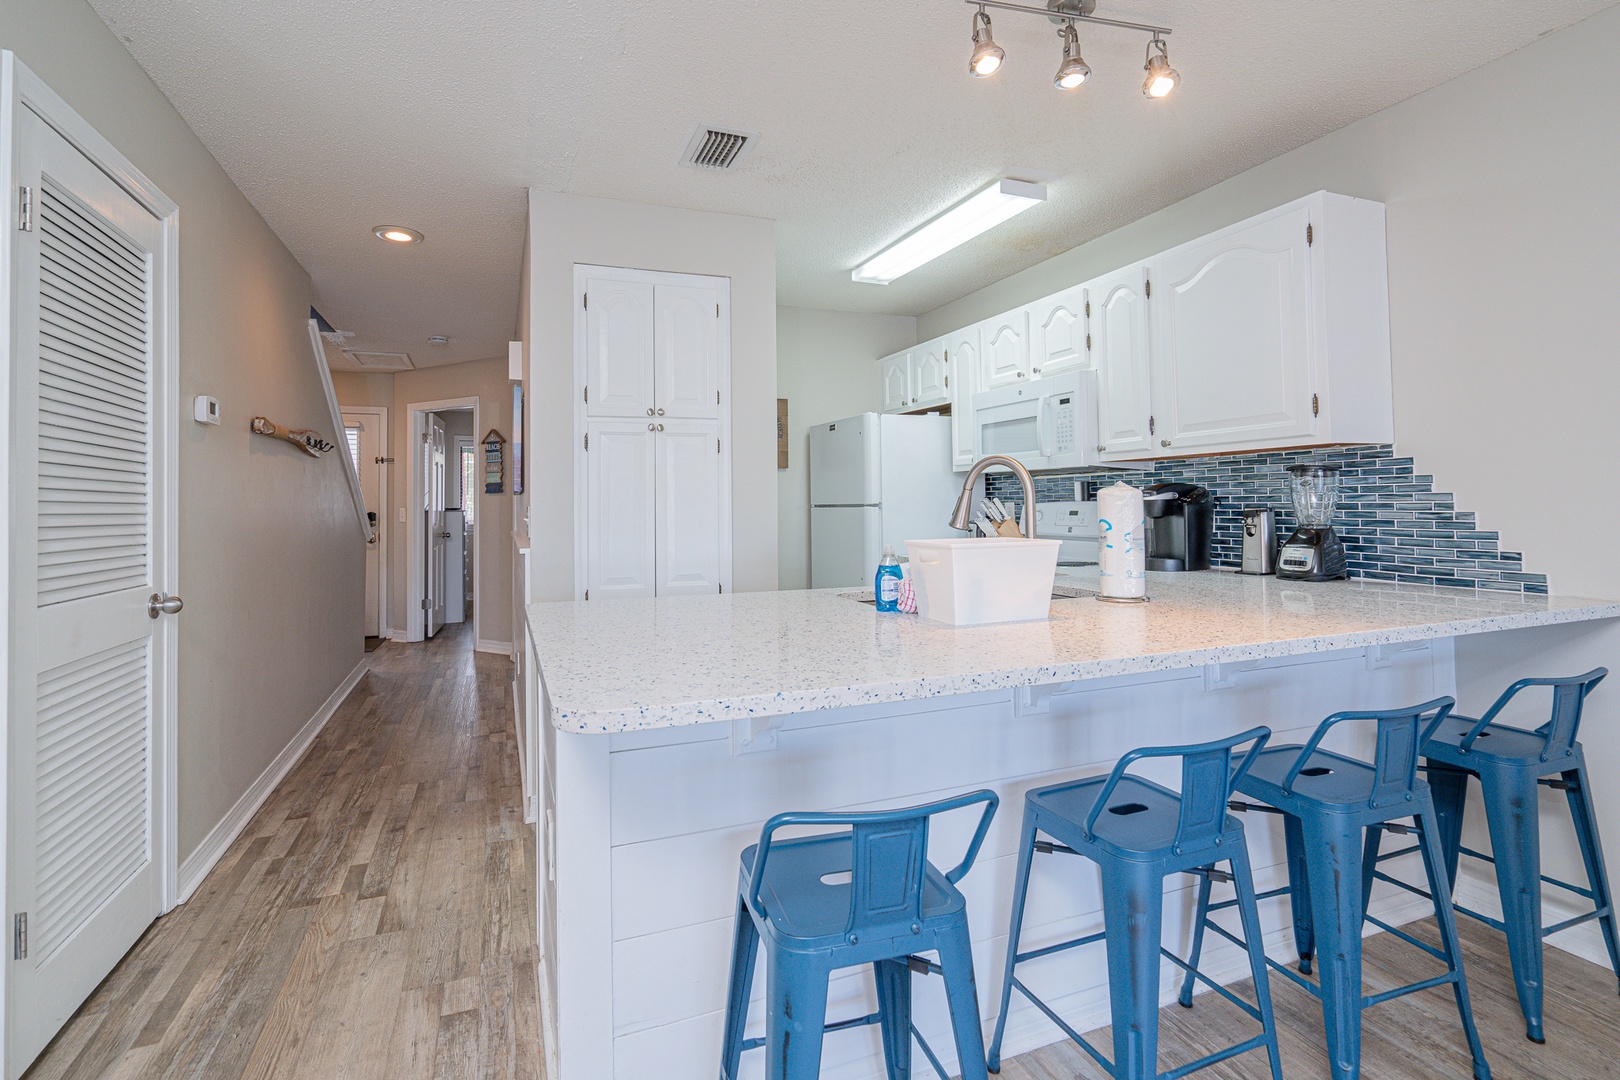 Sip morning coffee or grab a bite at the kitchen counter, with space for 4